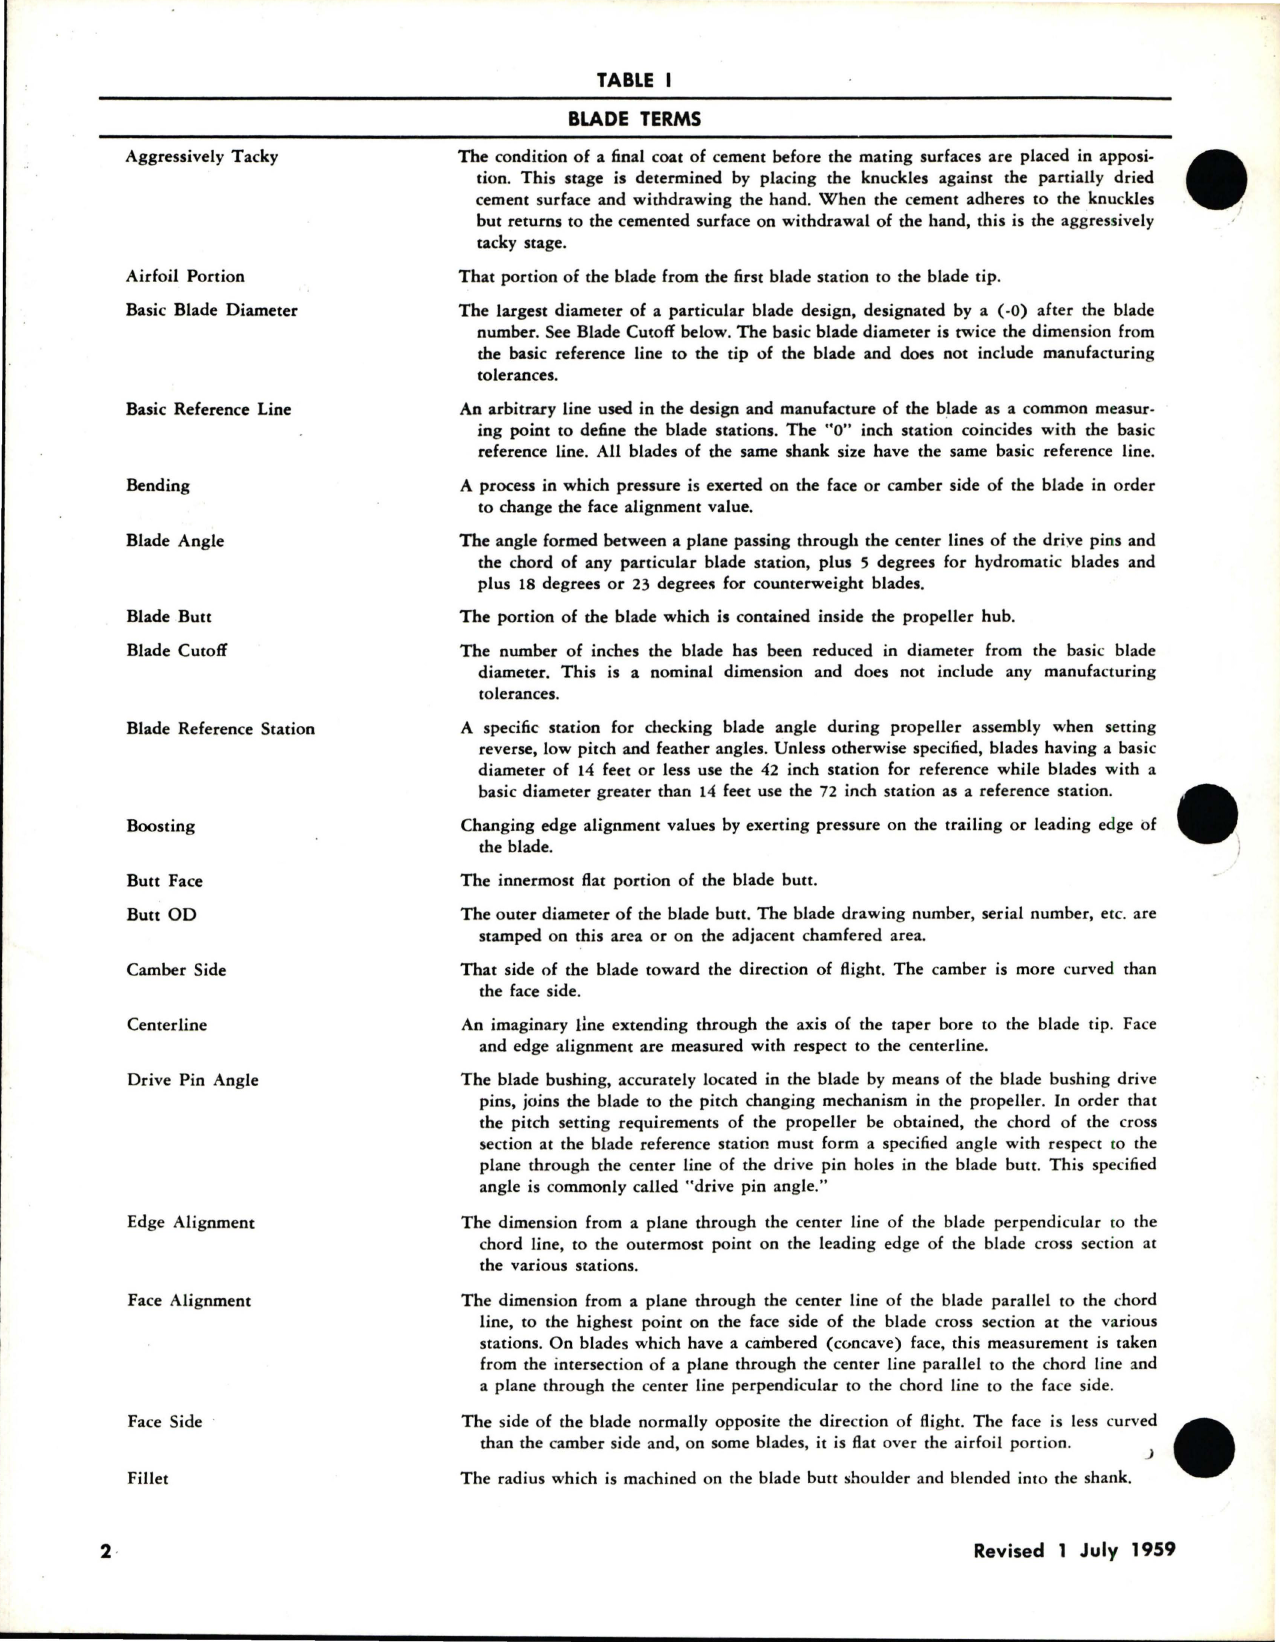 Sample page 8 from AirCorps Library document: Overhaul Manual for Aluminum Blade 